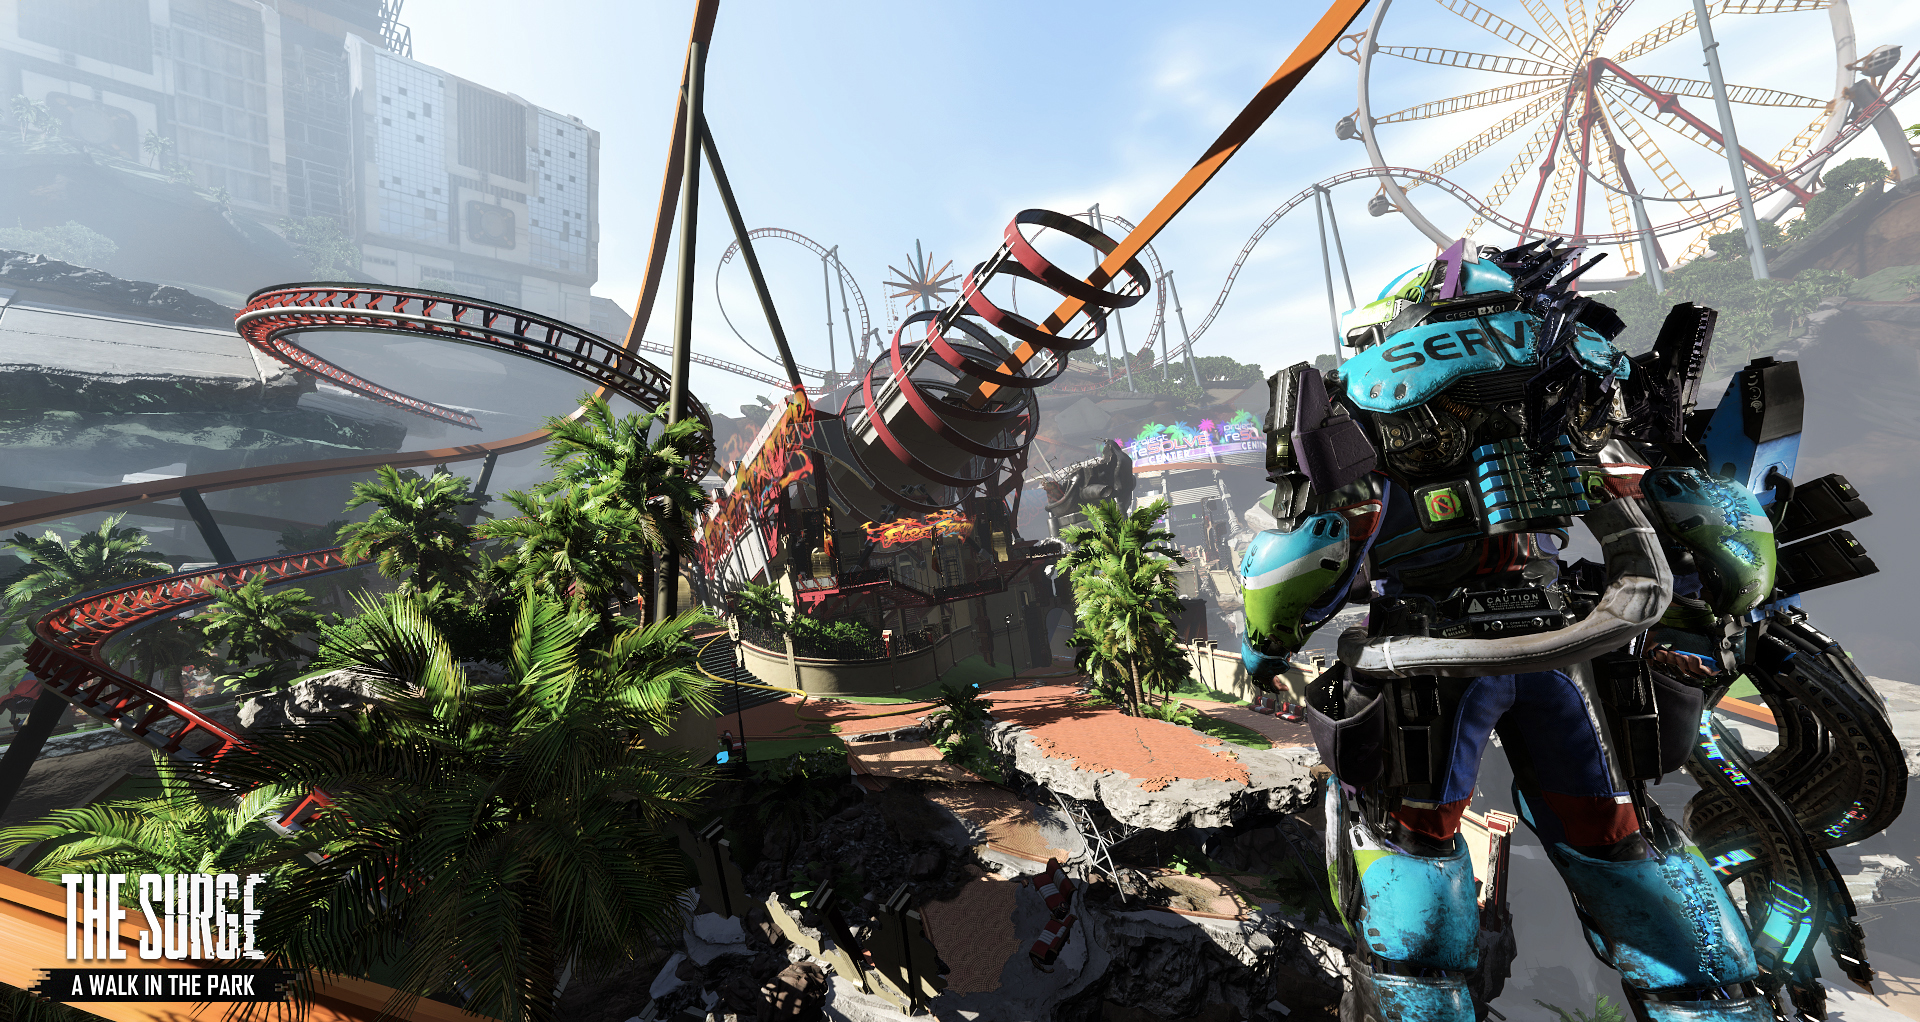 05_TheSurge_A_Walk_in_the_Park